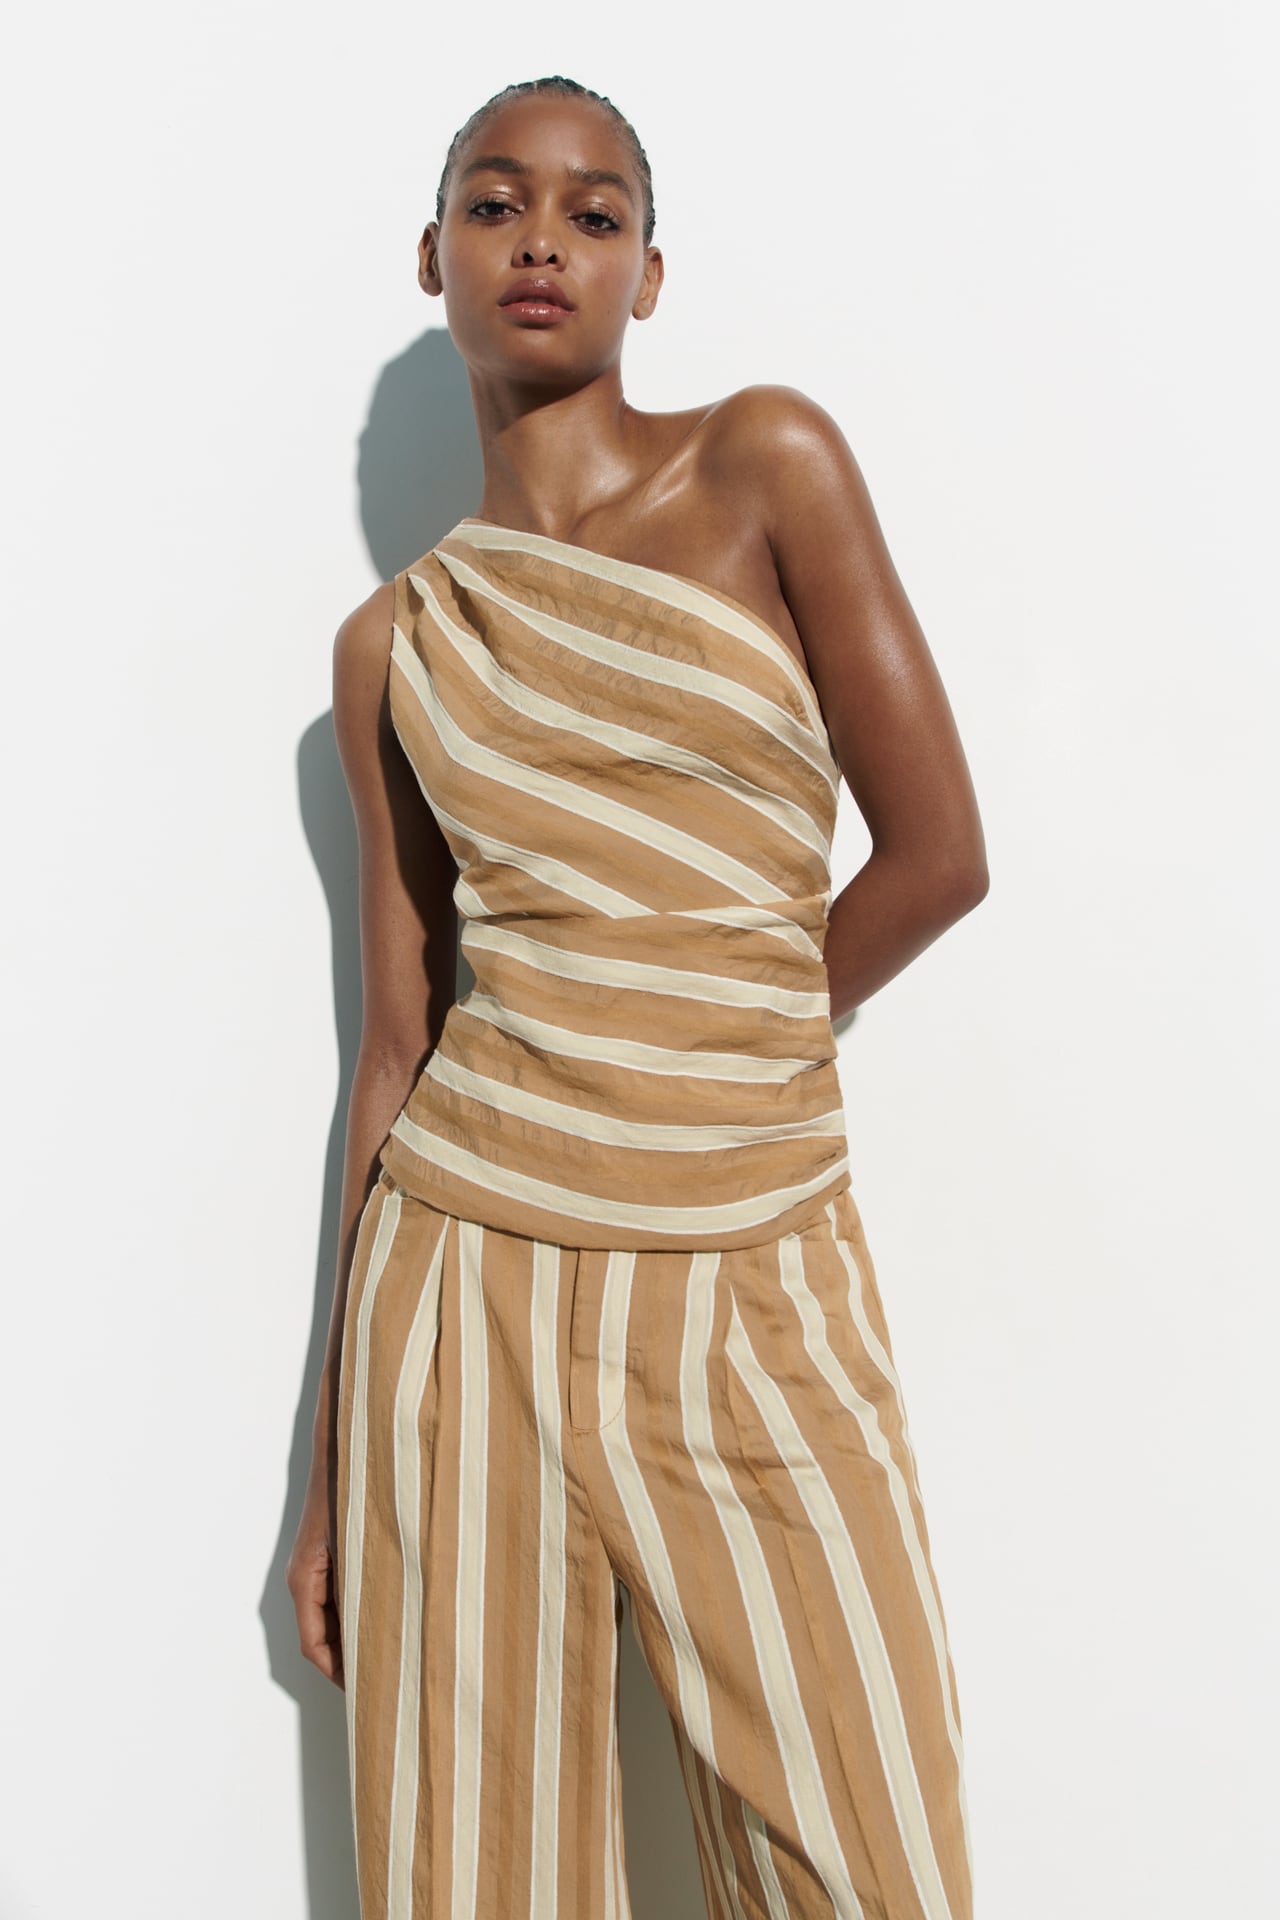 image of a model wearing a matching yellow and cream striped set from zara. The top is one shouldered and the pants are baggy